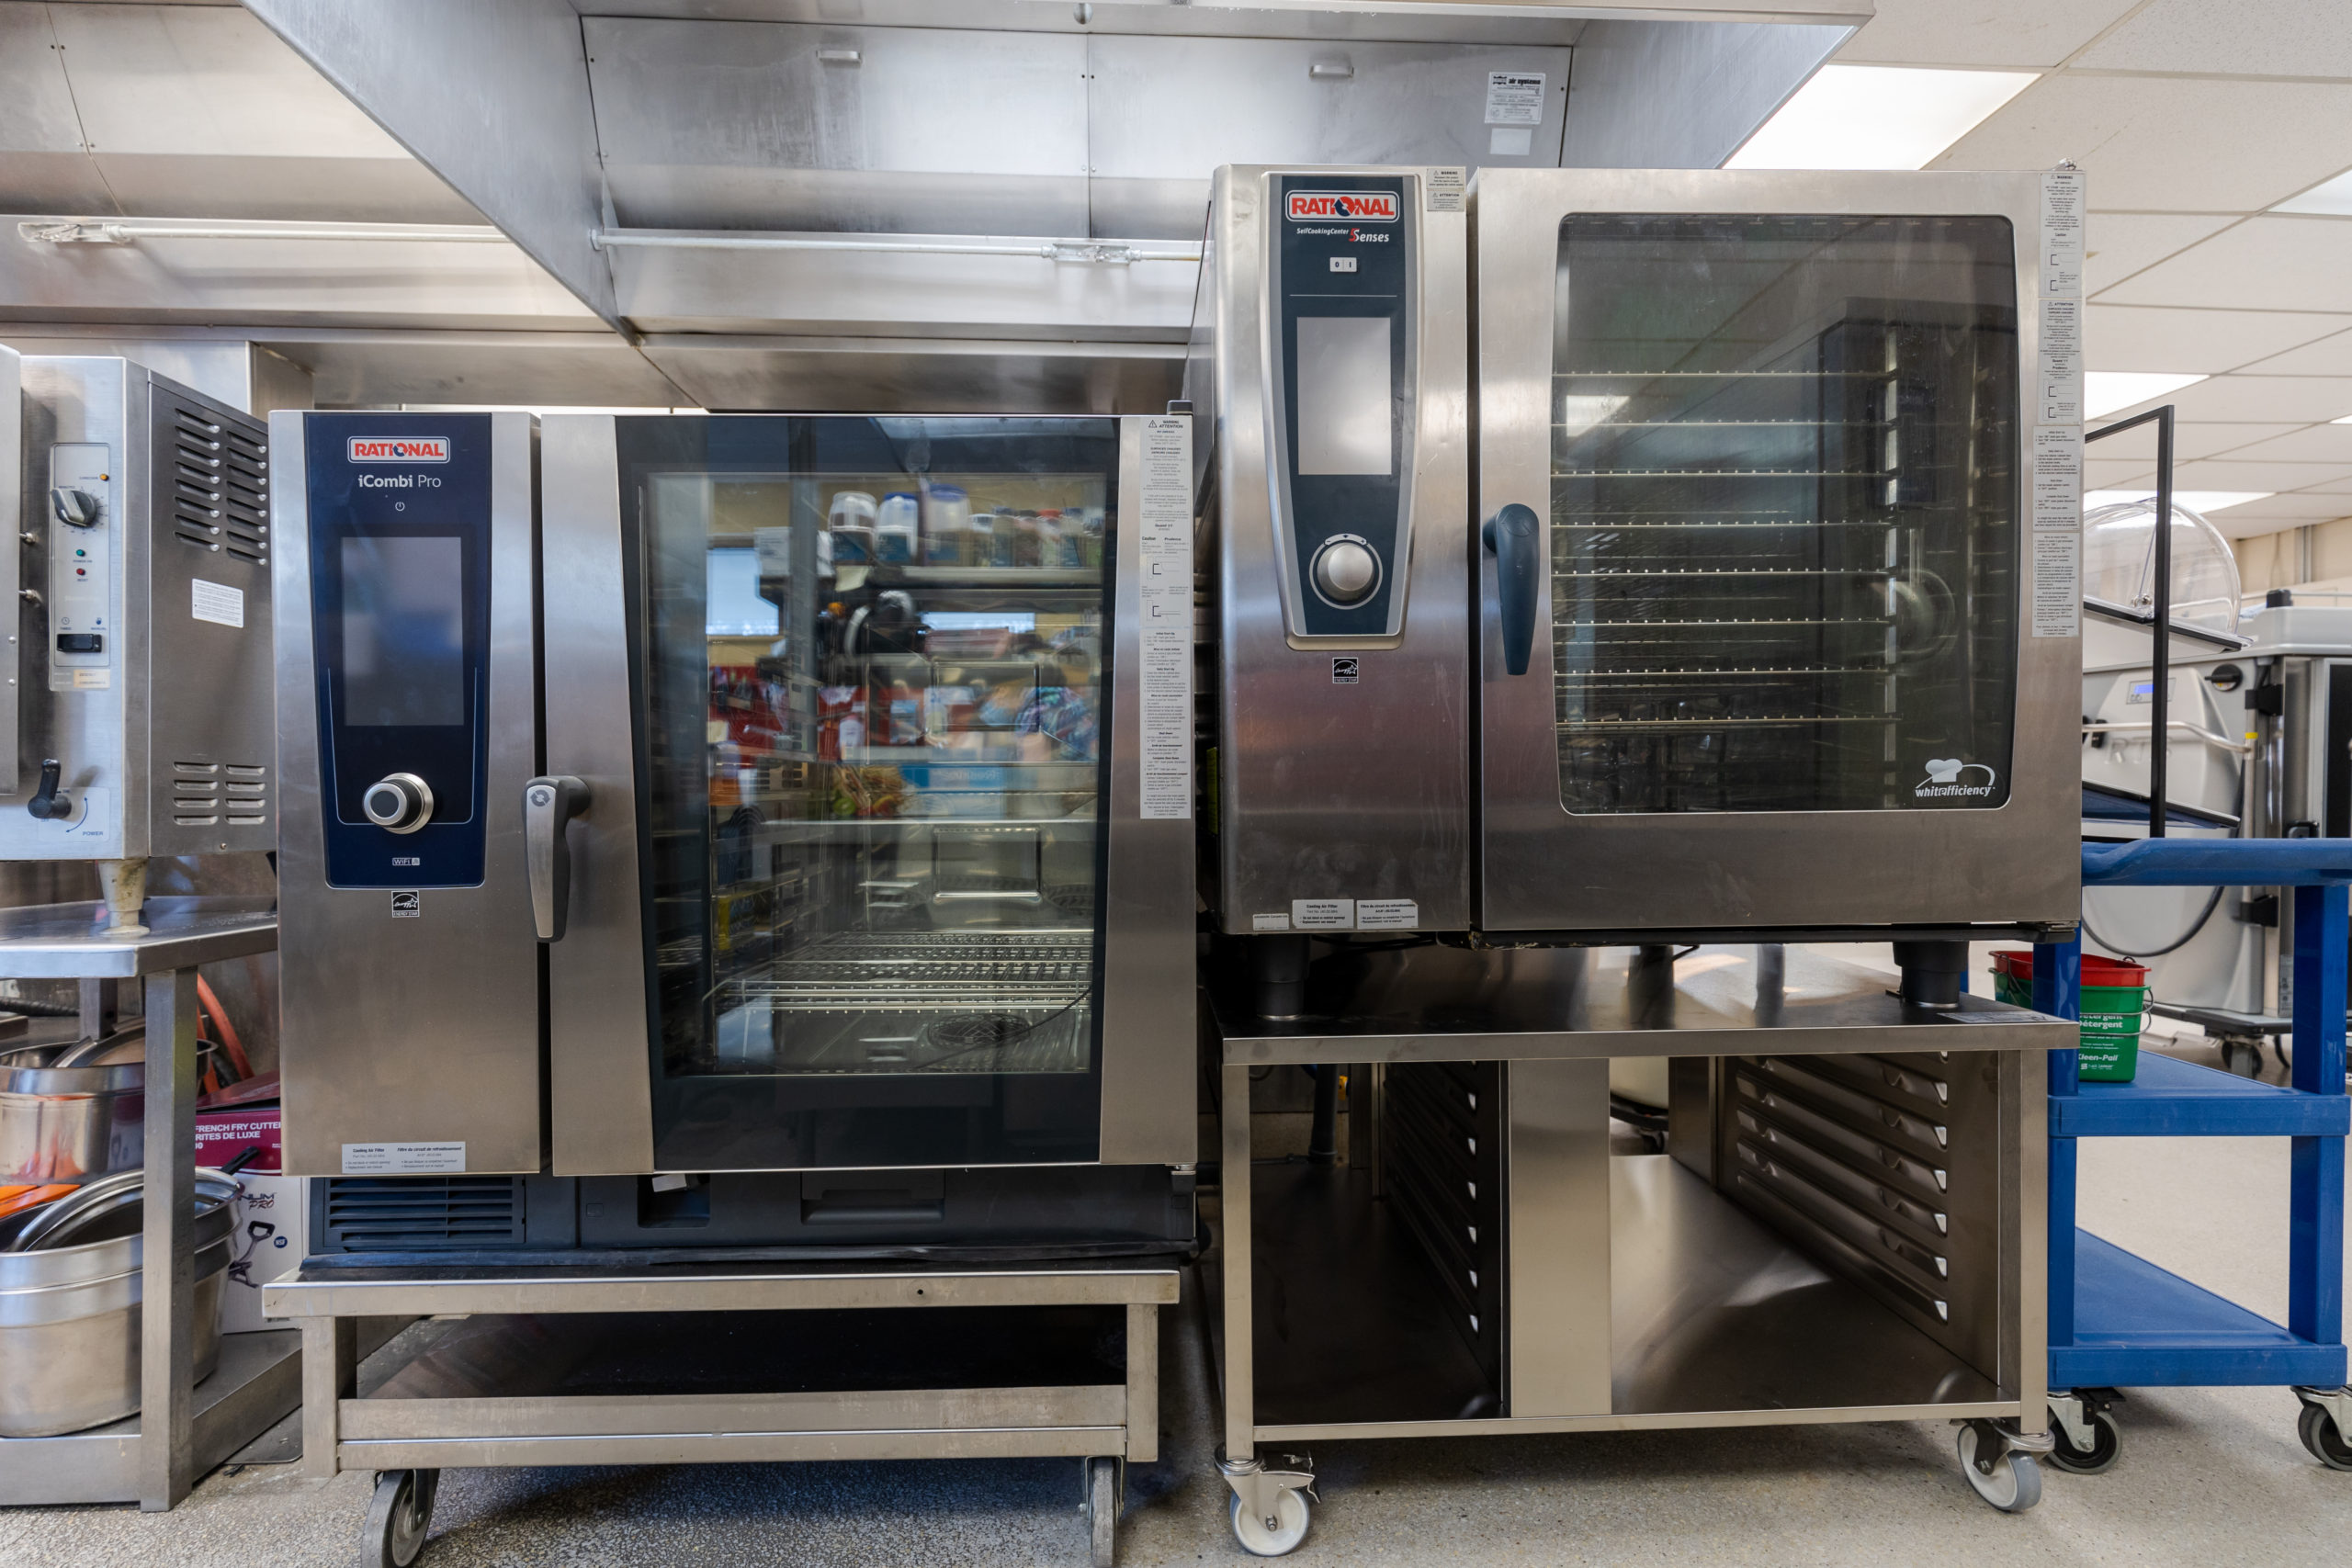 Two large metal industrial sized ovens sitting on steel rolling carts with shelves.